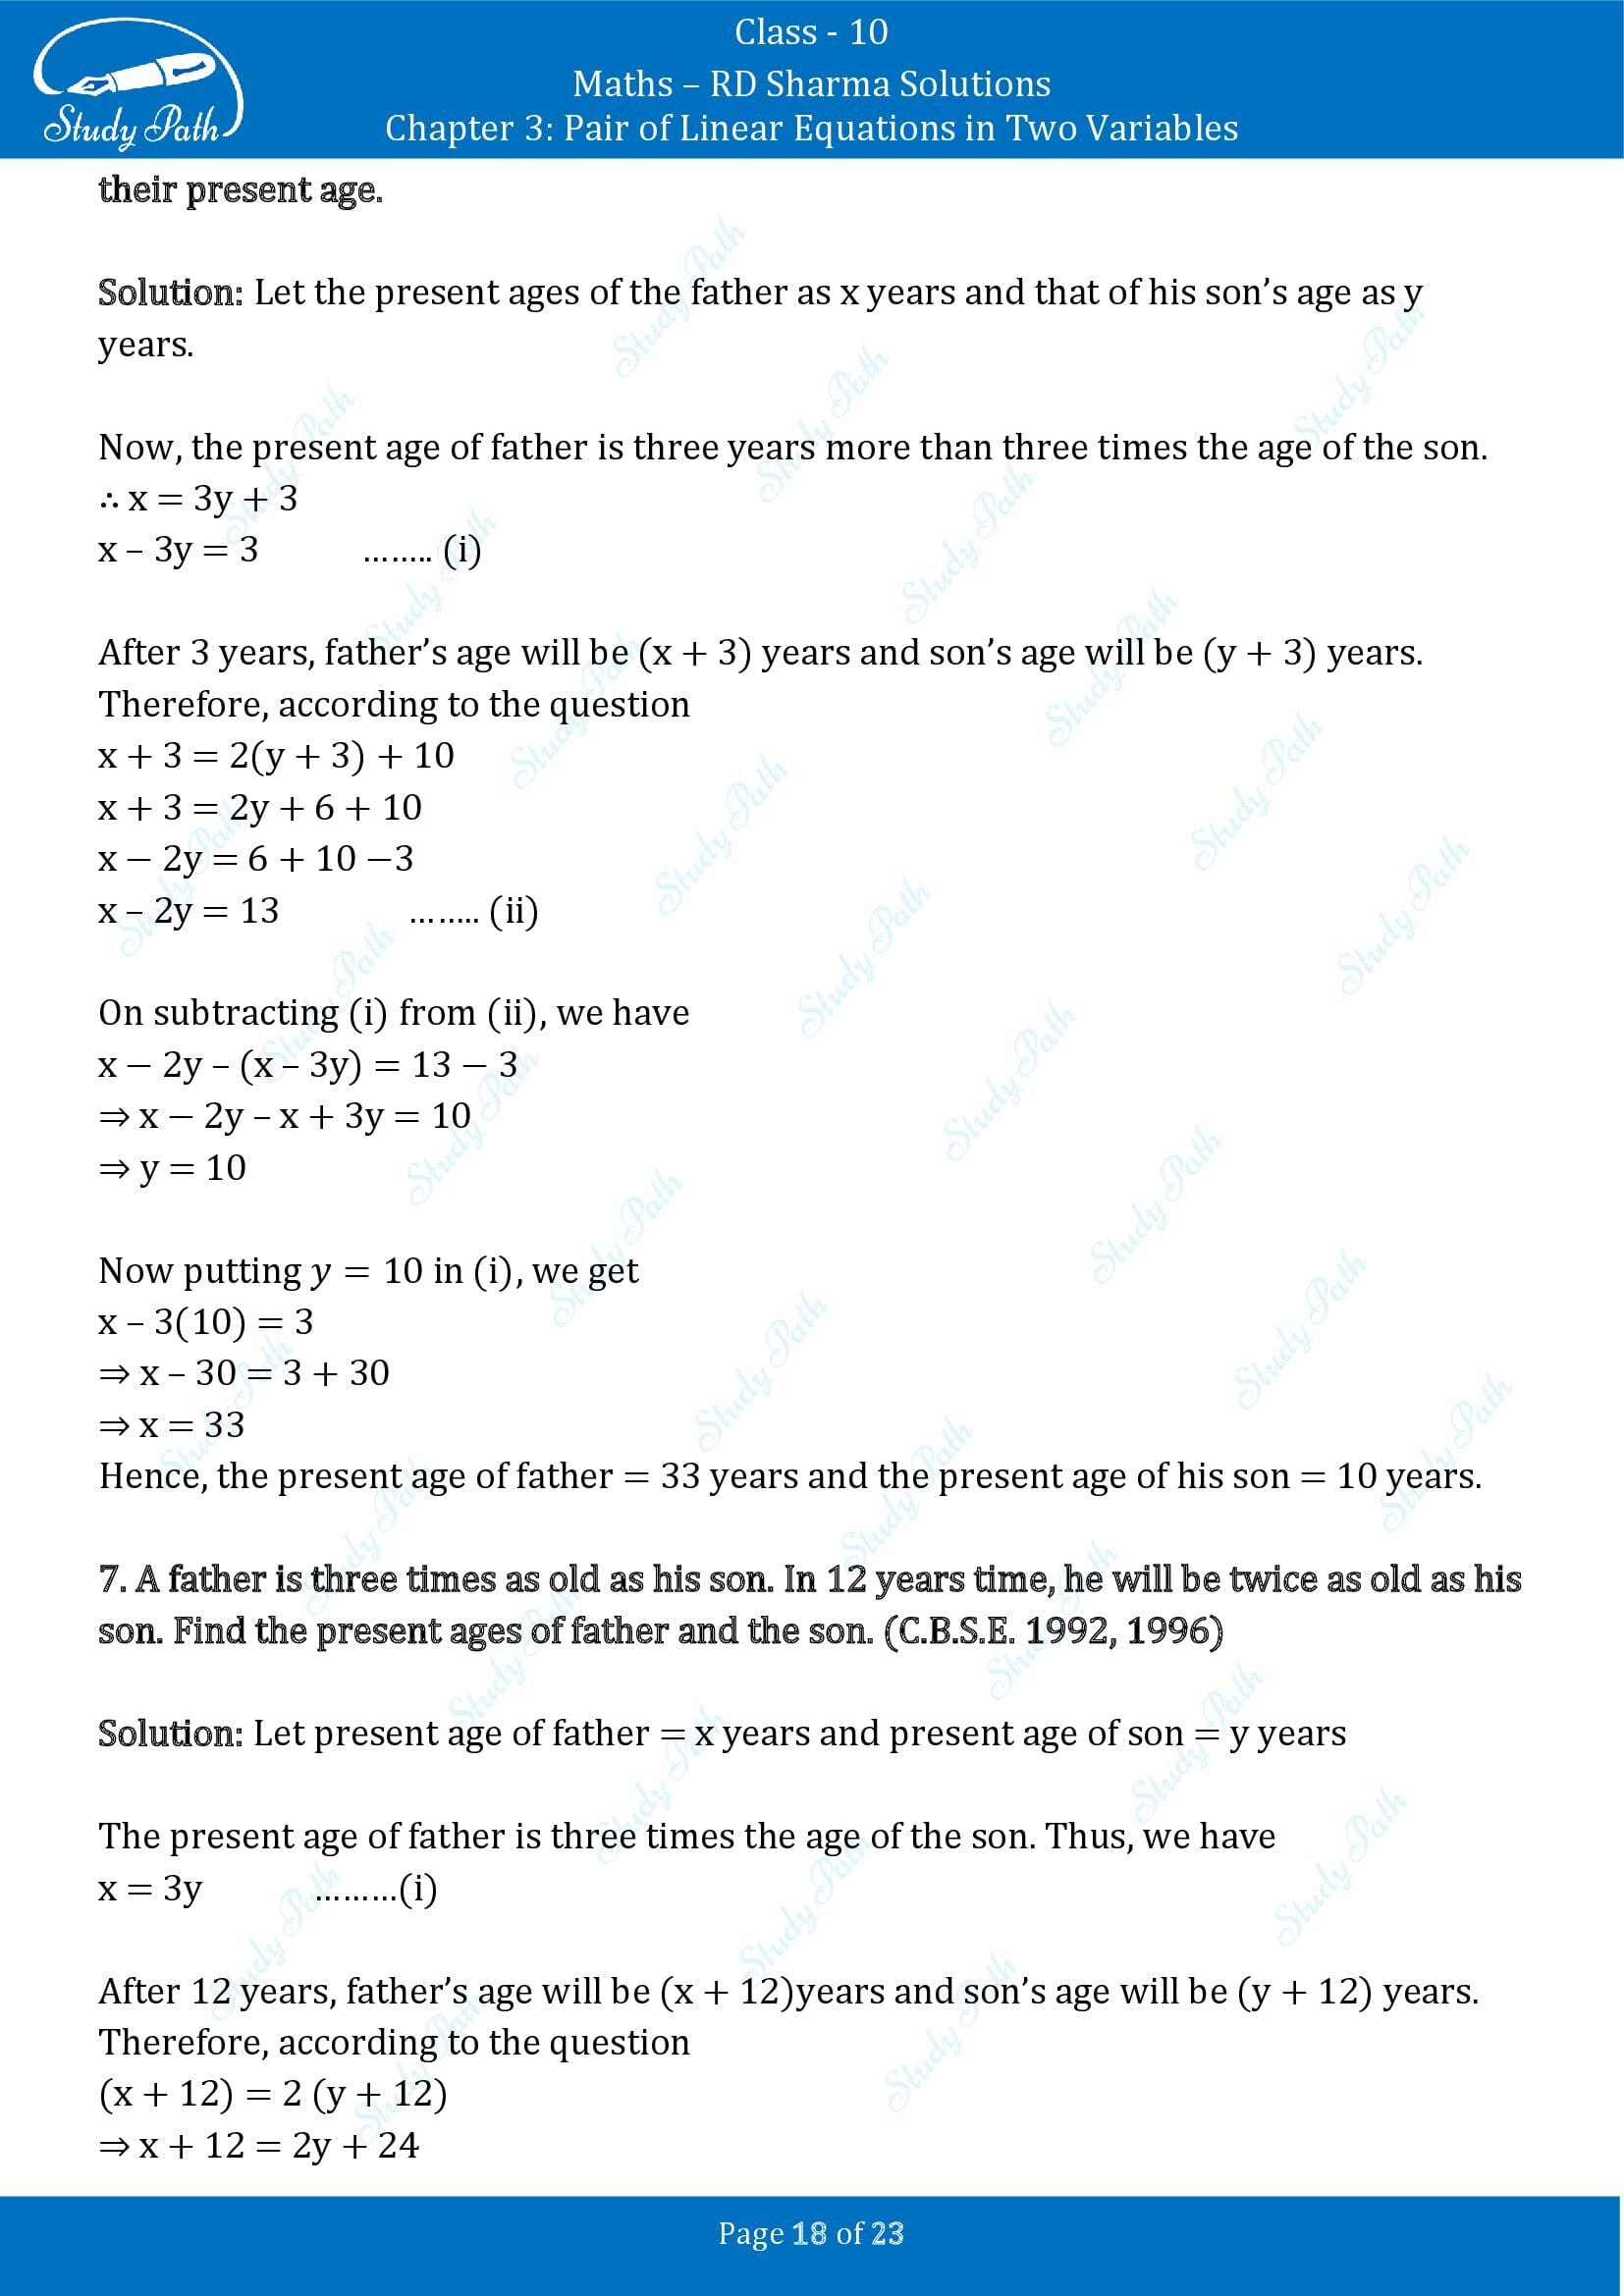 RD Sharma Solutions Class 10 Chapter 3 Pair of Linear Equations in Two Variables Exercise 3.8 00018